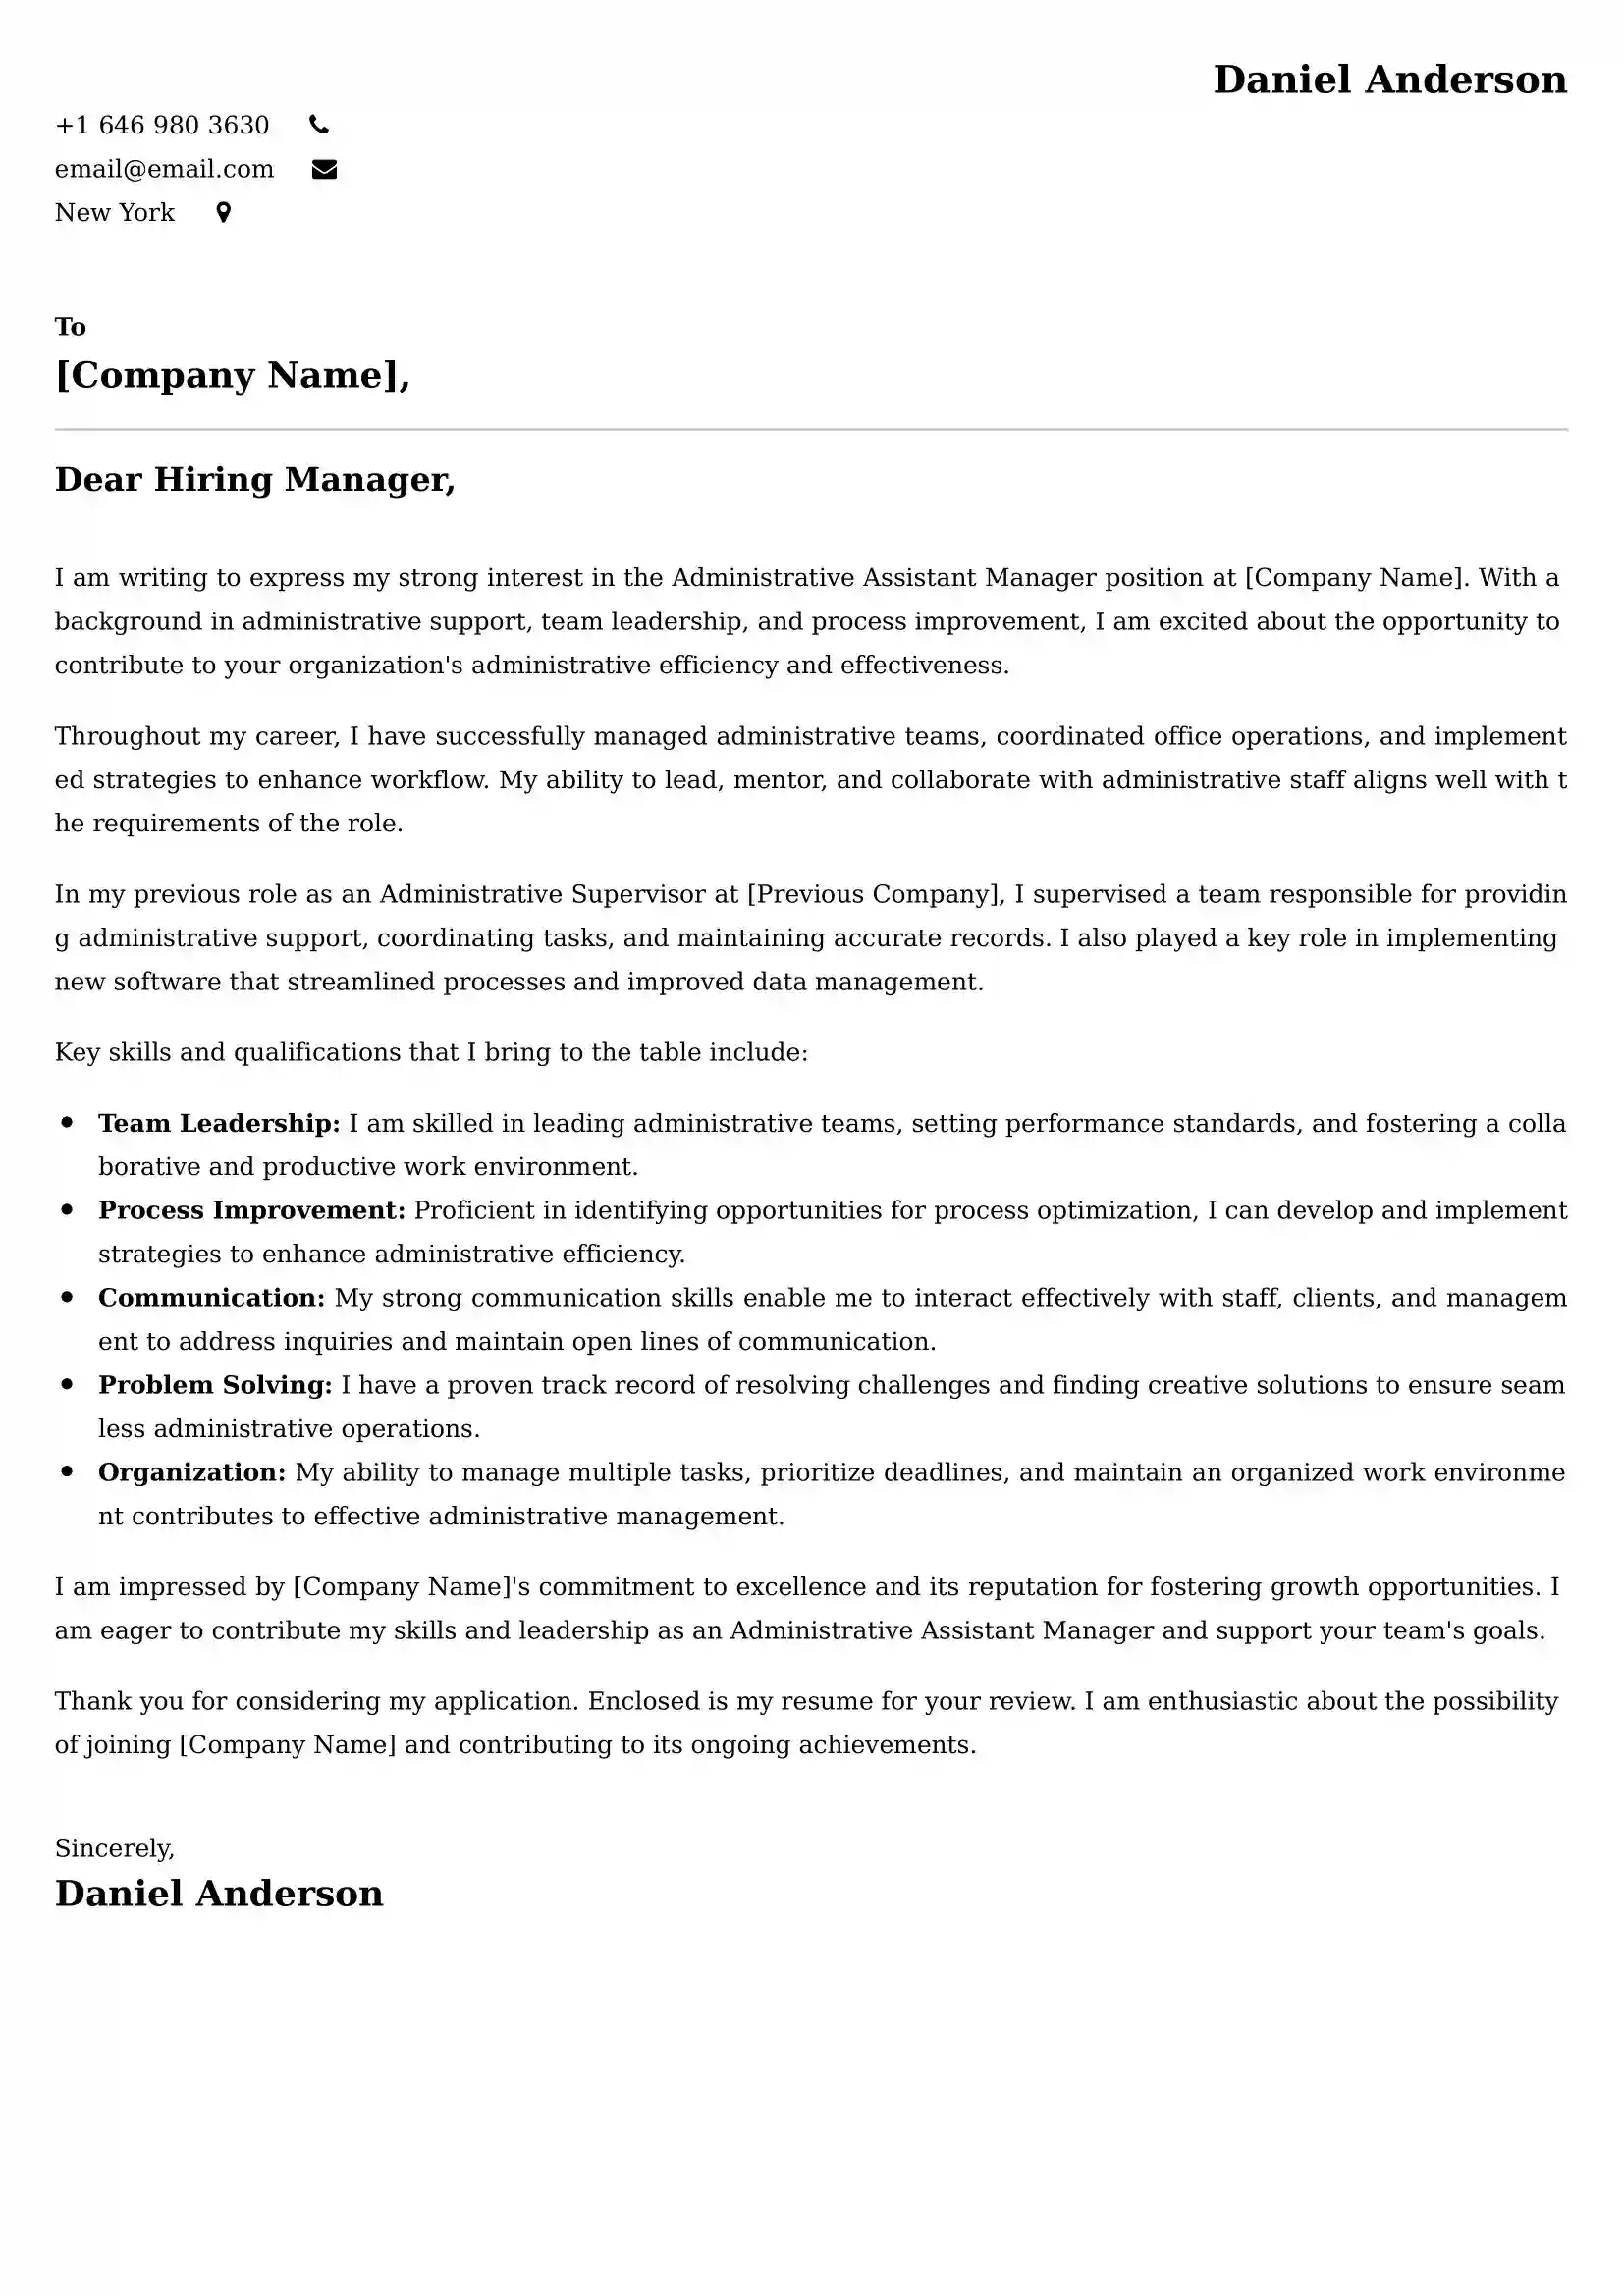 Administrative Assistant Manager Cover Letter Examples - Latest UK Format